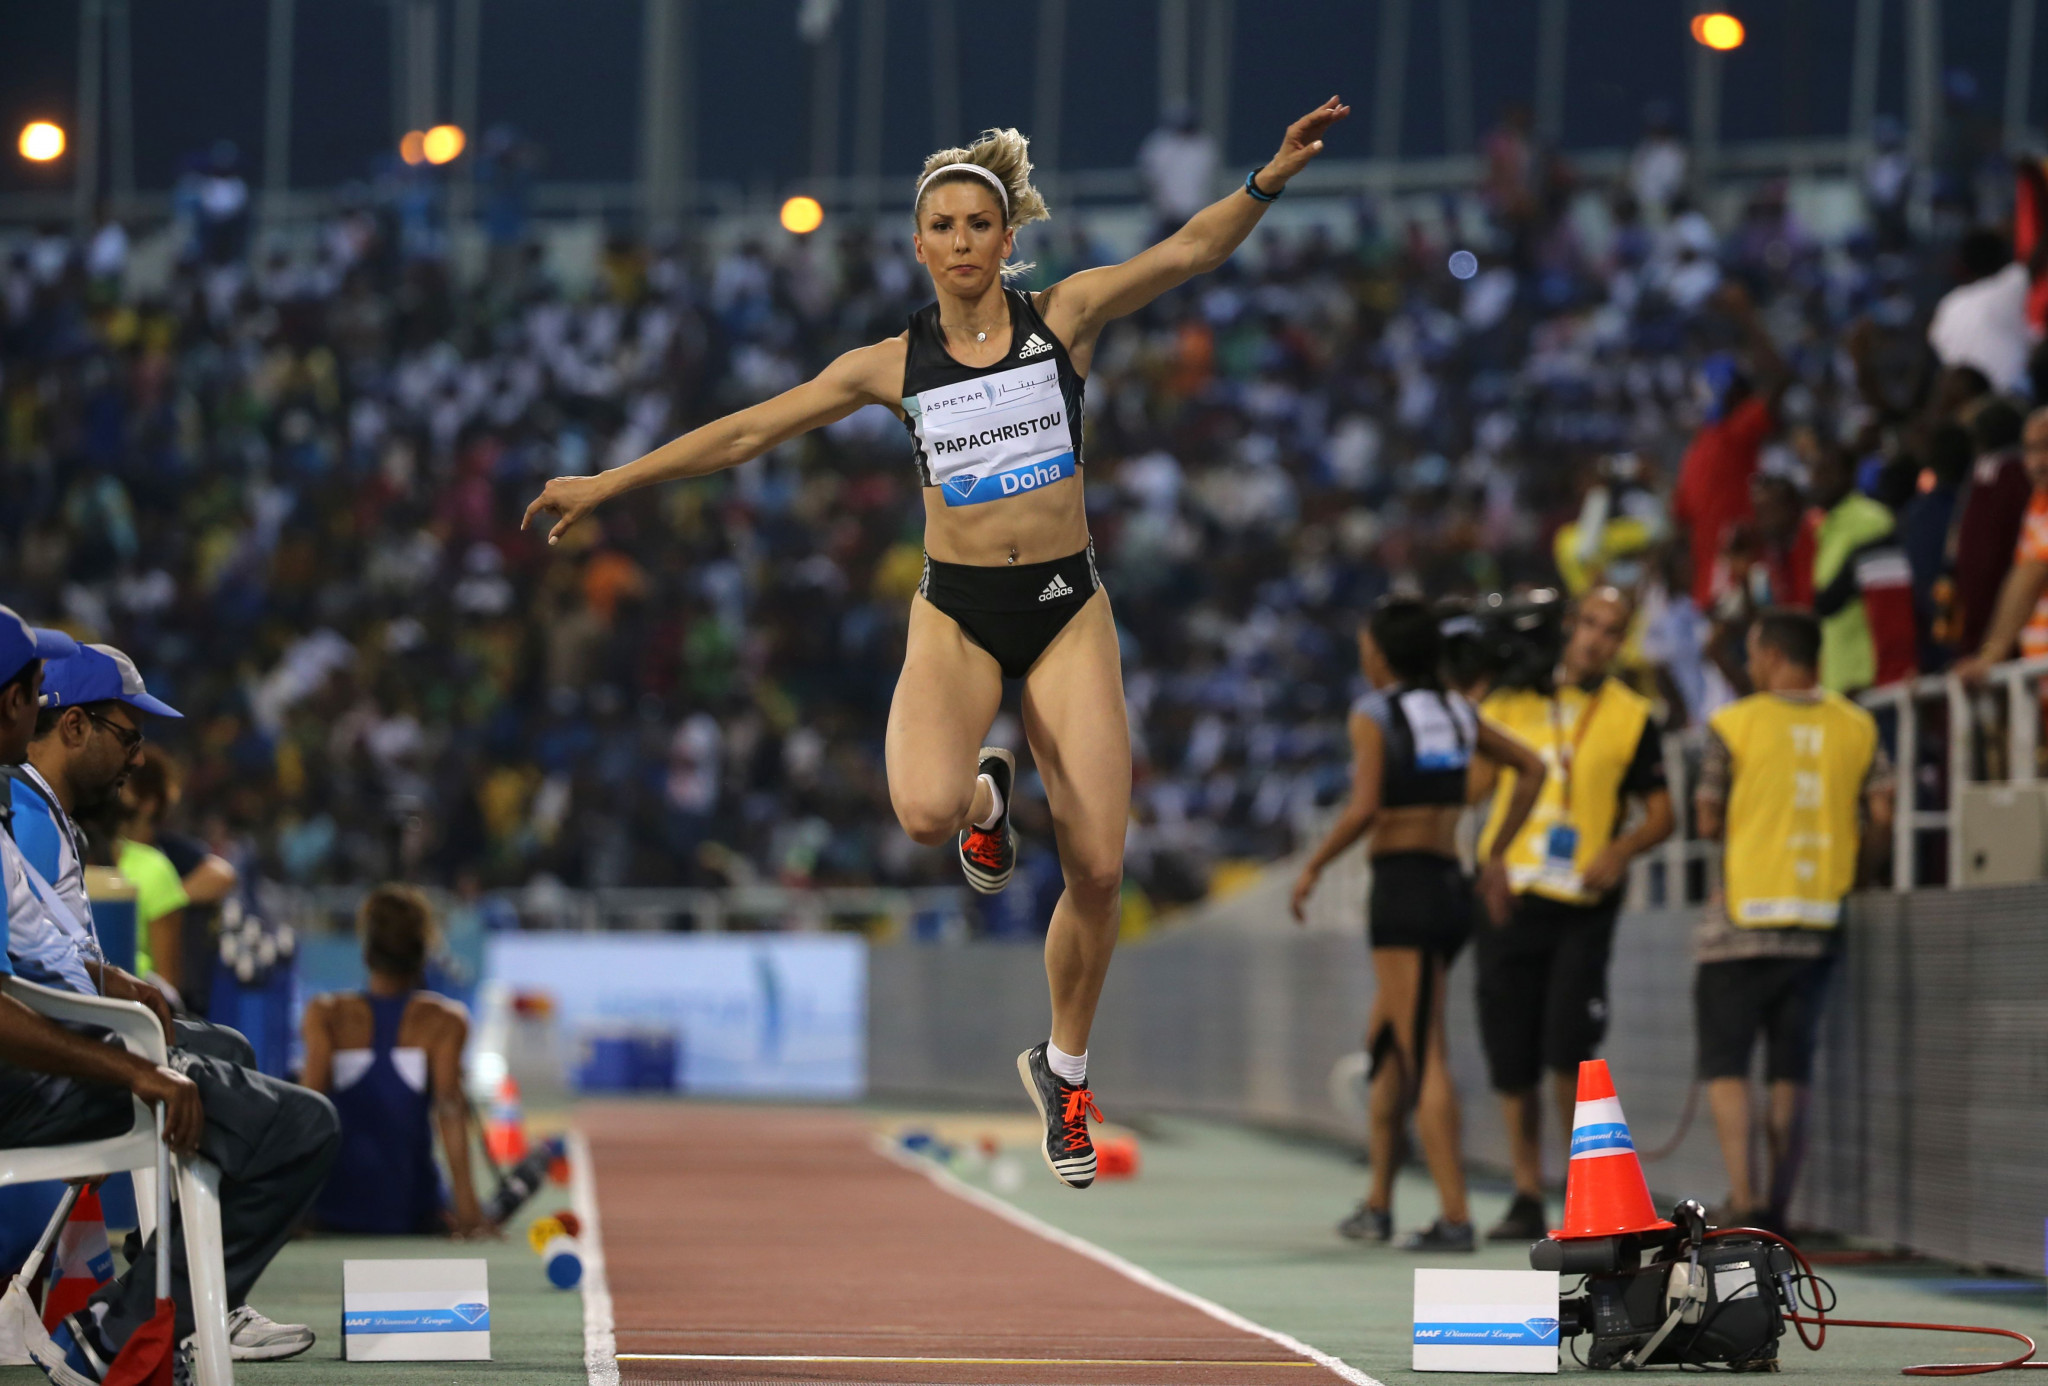 Like her team mate Katerina Stefanidi, Greek triple jumper Paraskevi Papachristou will now not need to repay the bonus she earned for winning bronze at the 2016 World Indoor Championships in Portland, Oregon ©Getty Images